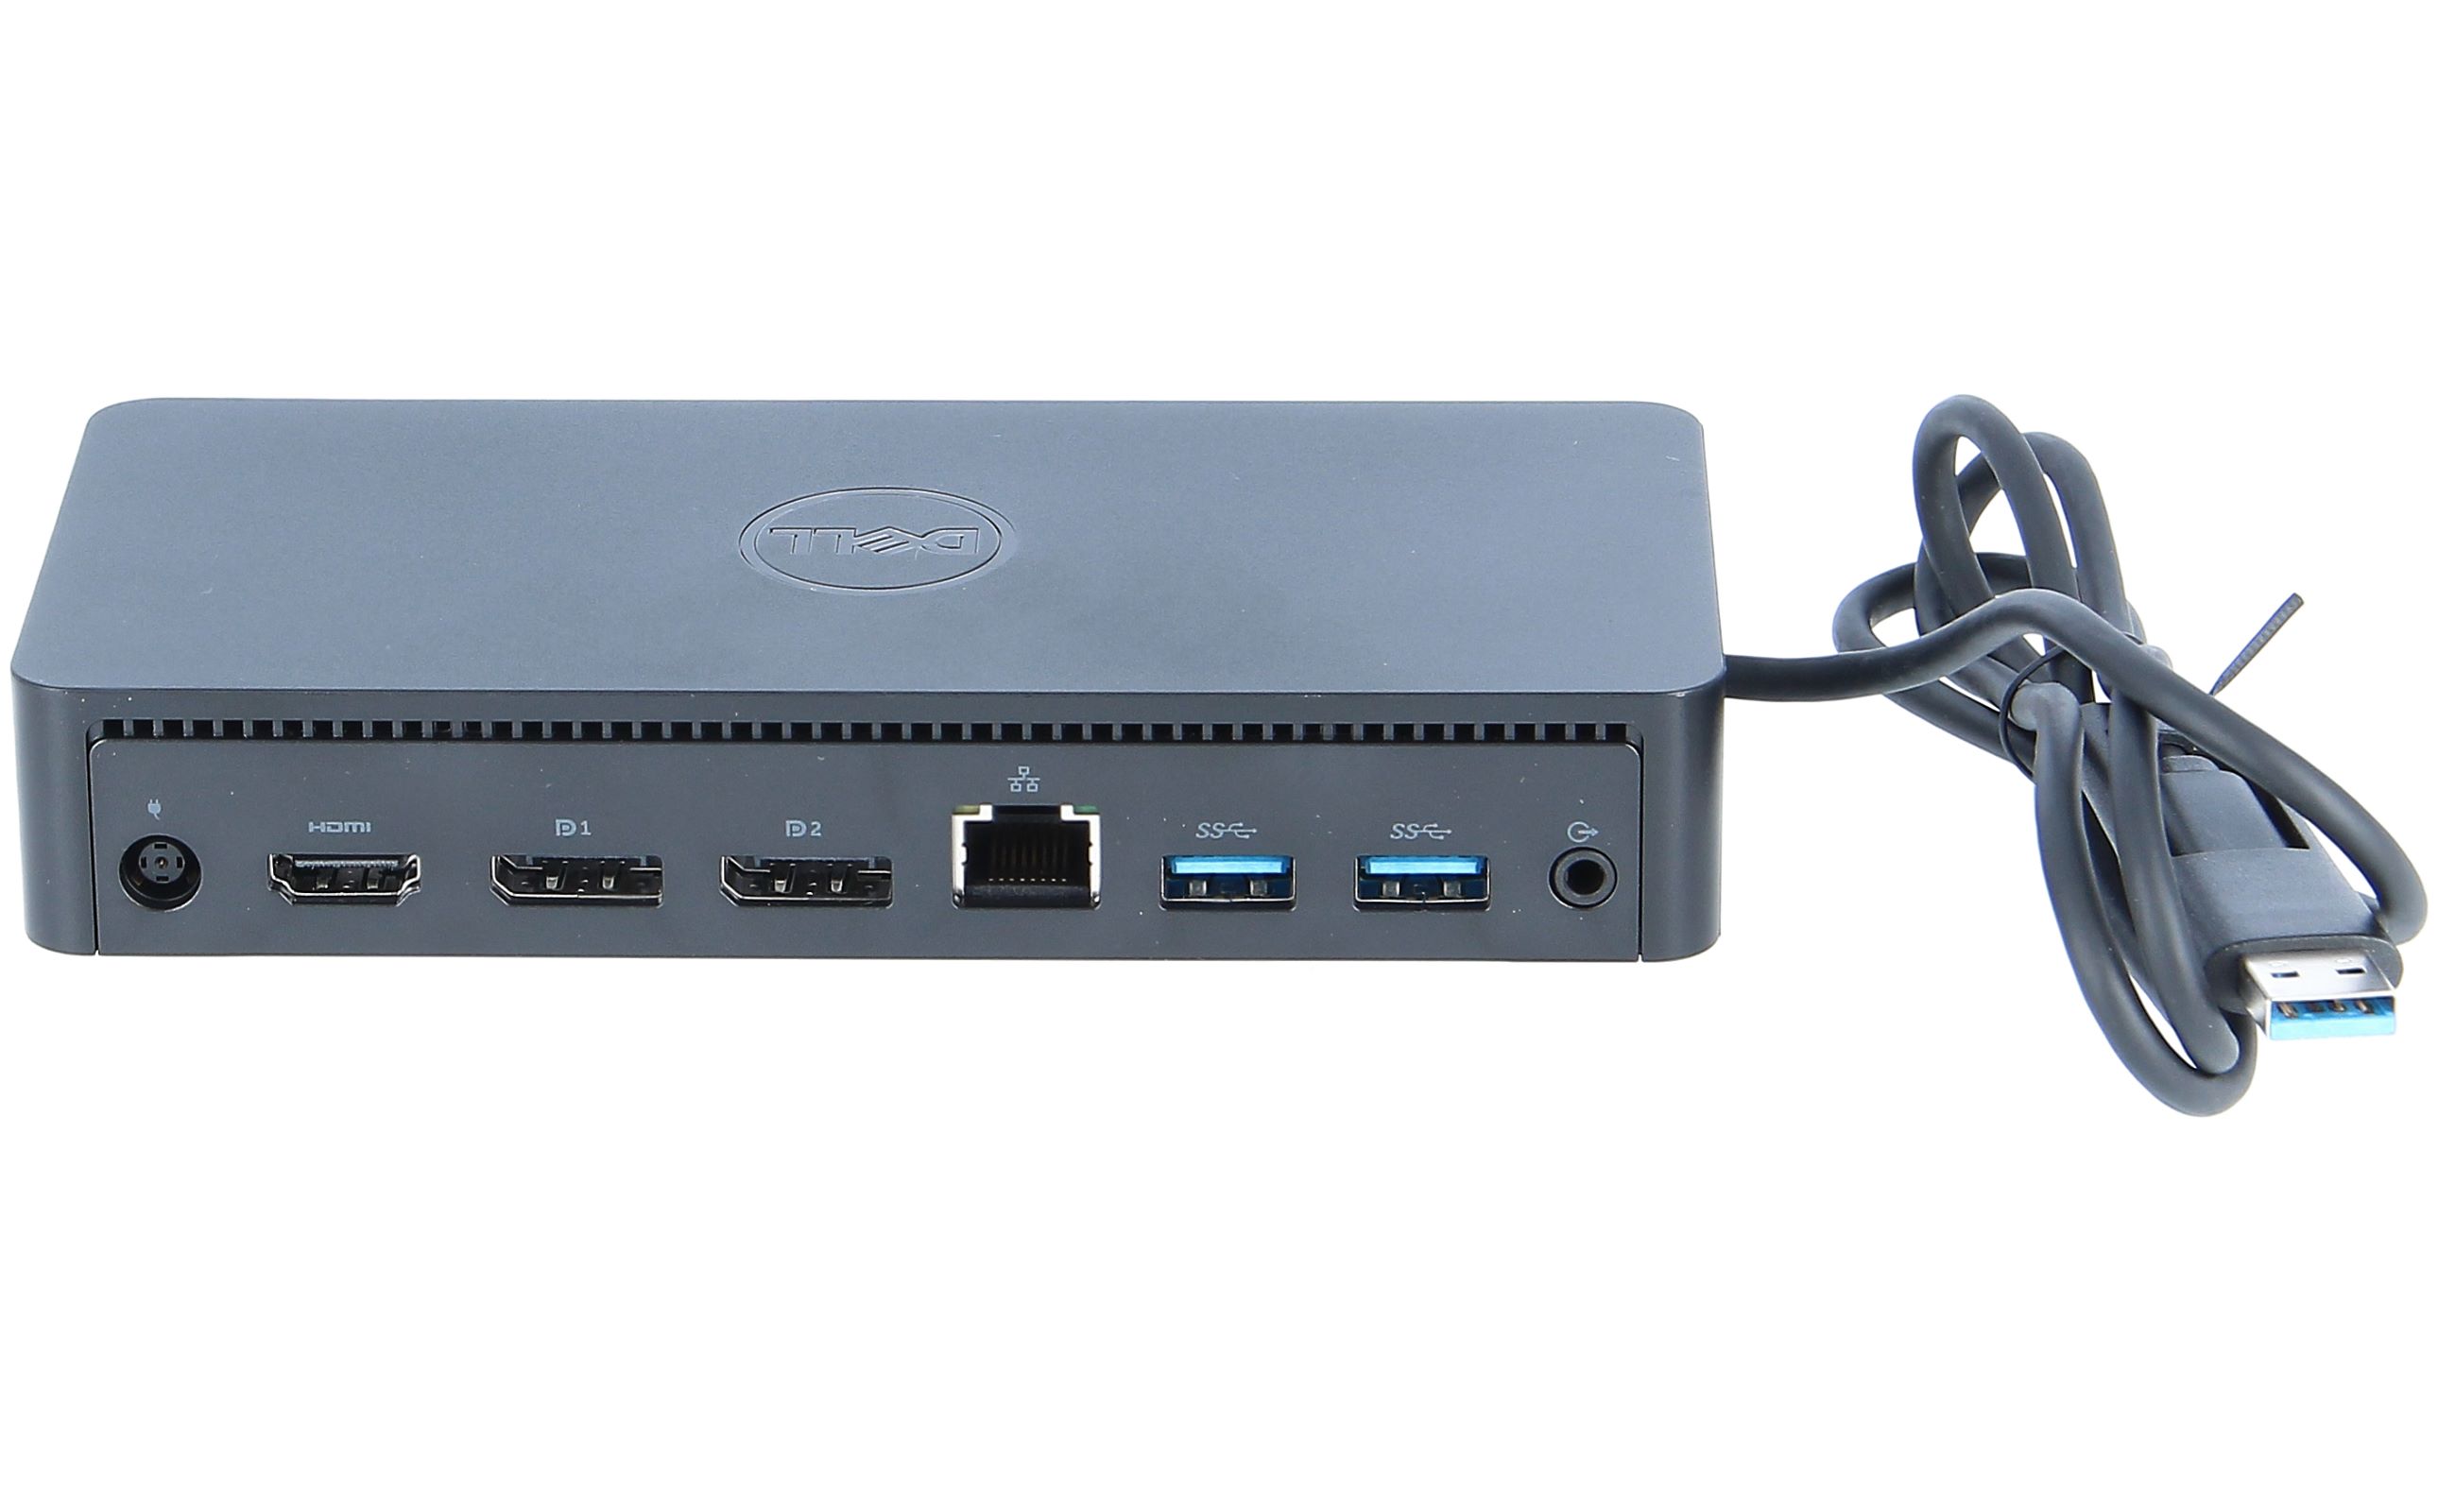 DELL - H82WW - Dell Universal Dock - D6000 - Docking Station new and  refurbished buy online low prices